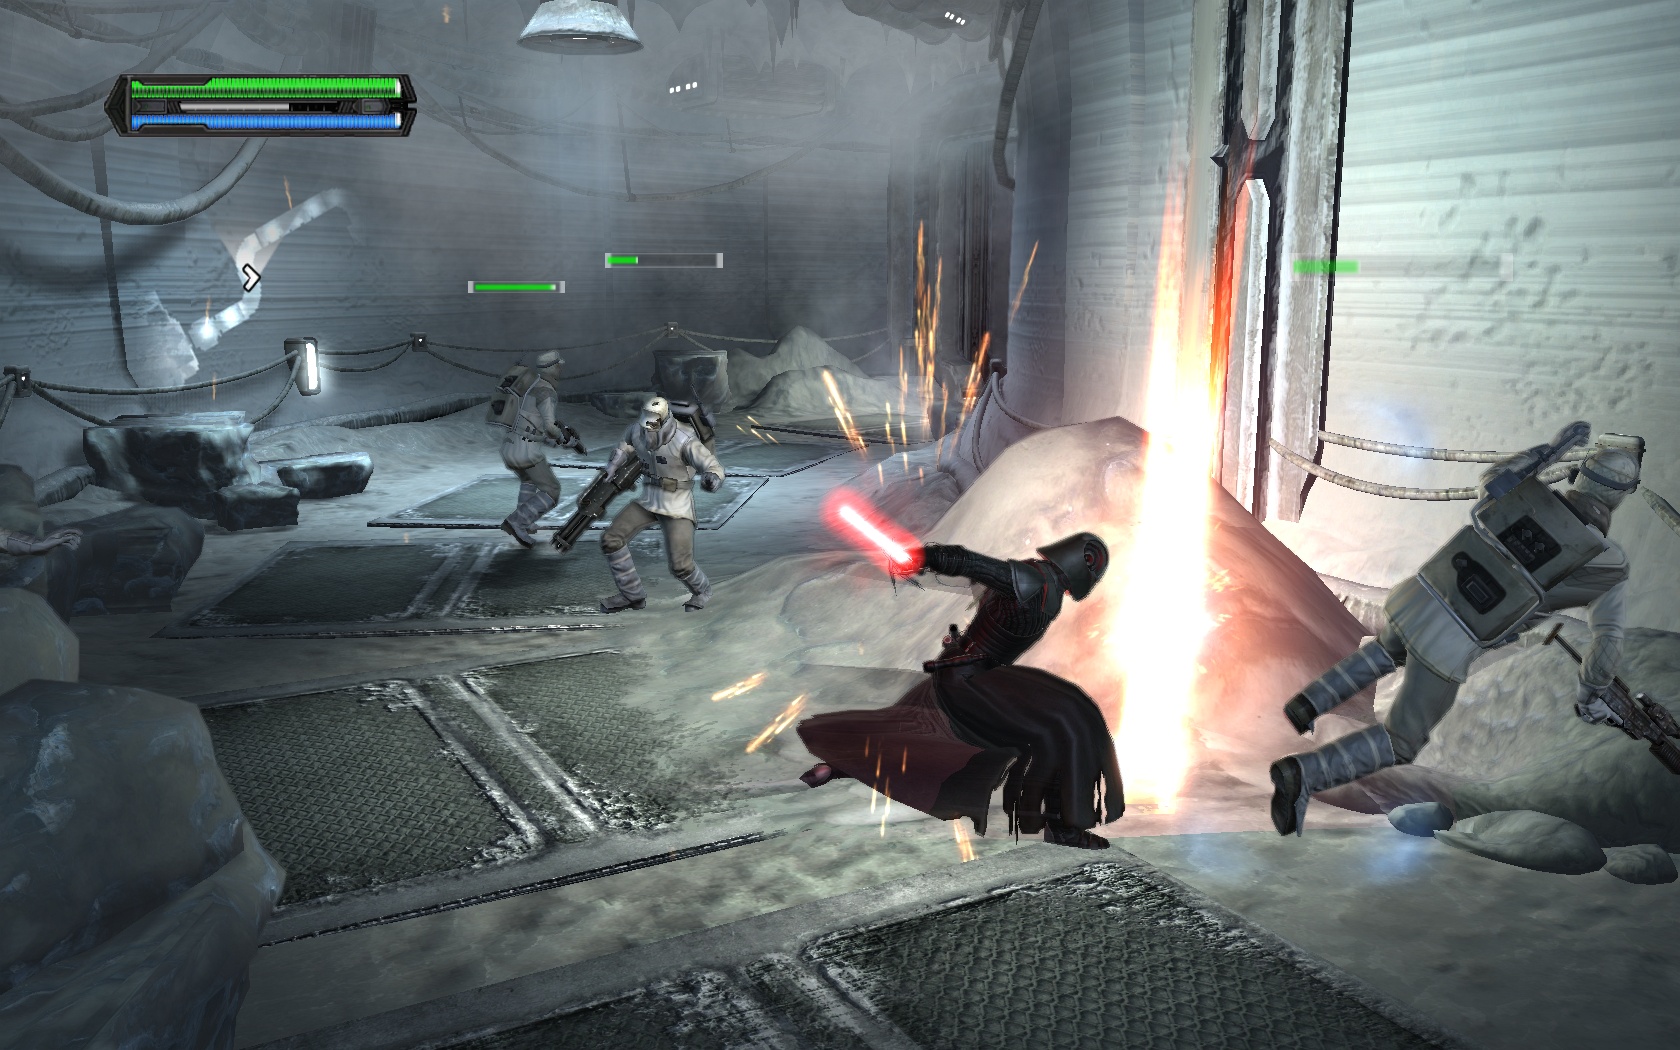 Star wars gameplay. Игра Star Wars unleashed 3. Star Wars the Force unleashed геймплей. Star Wars the Force unleashed 2 геймплей. Star Wars the Force unleashed 1 на ps2.